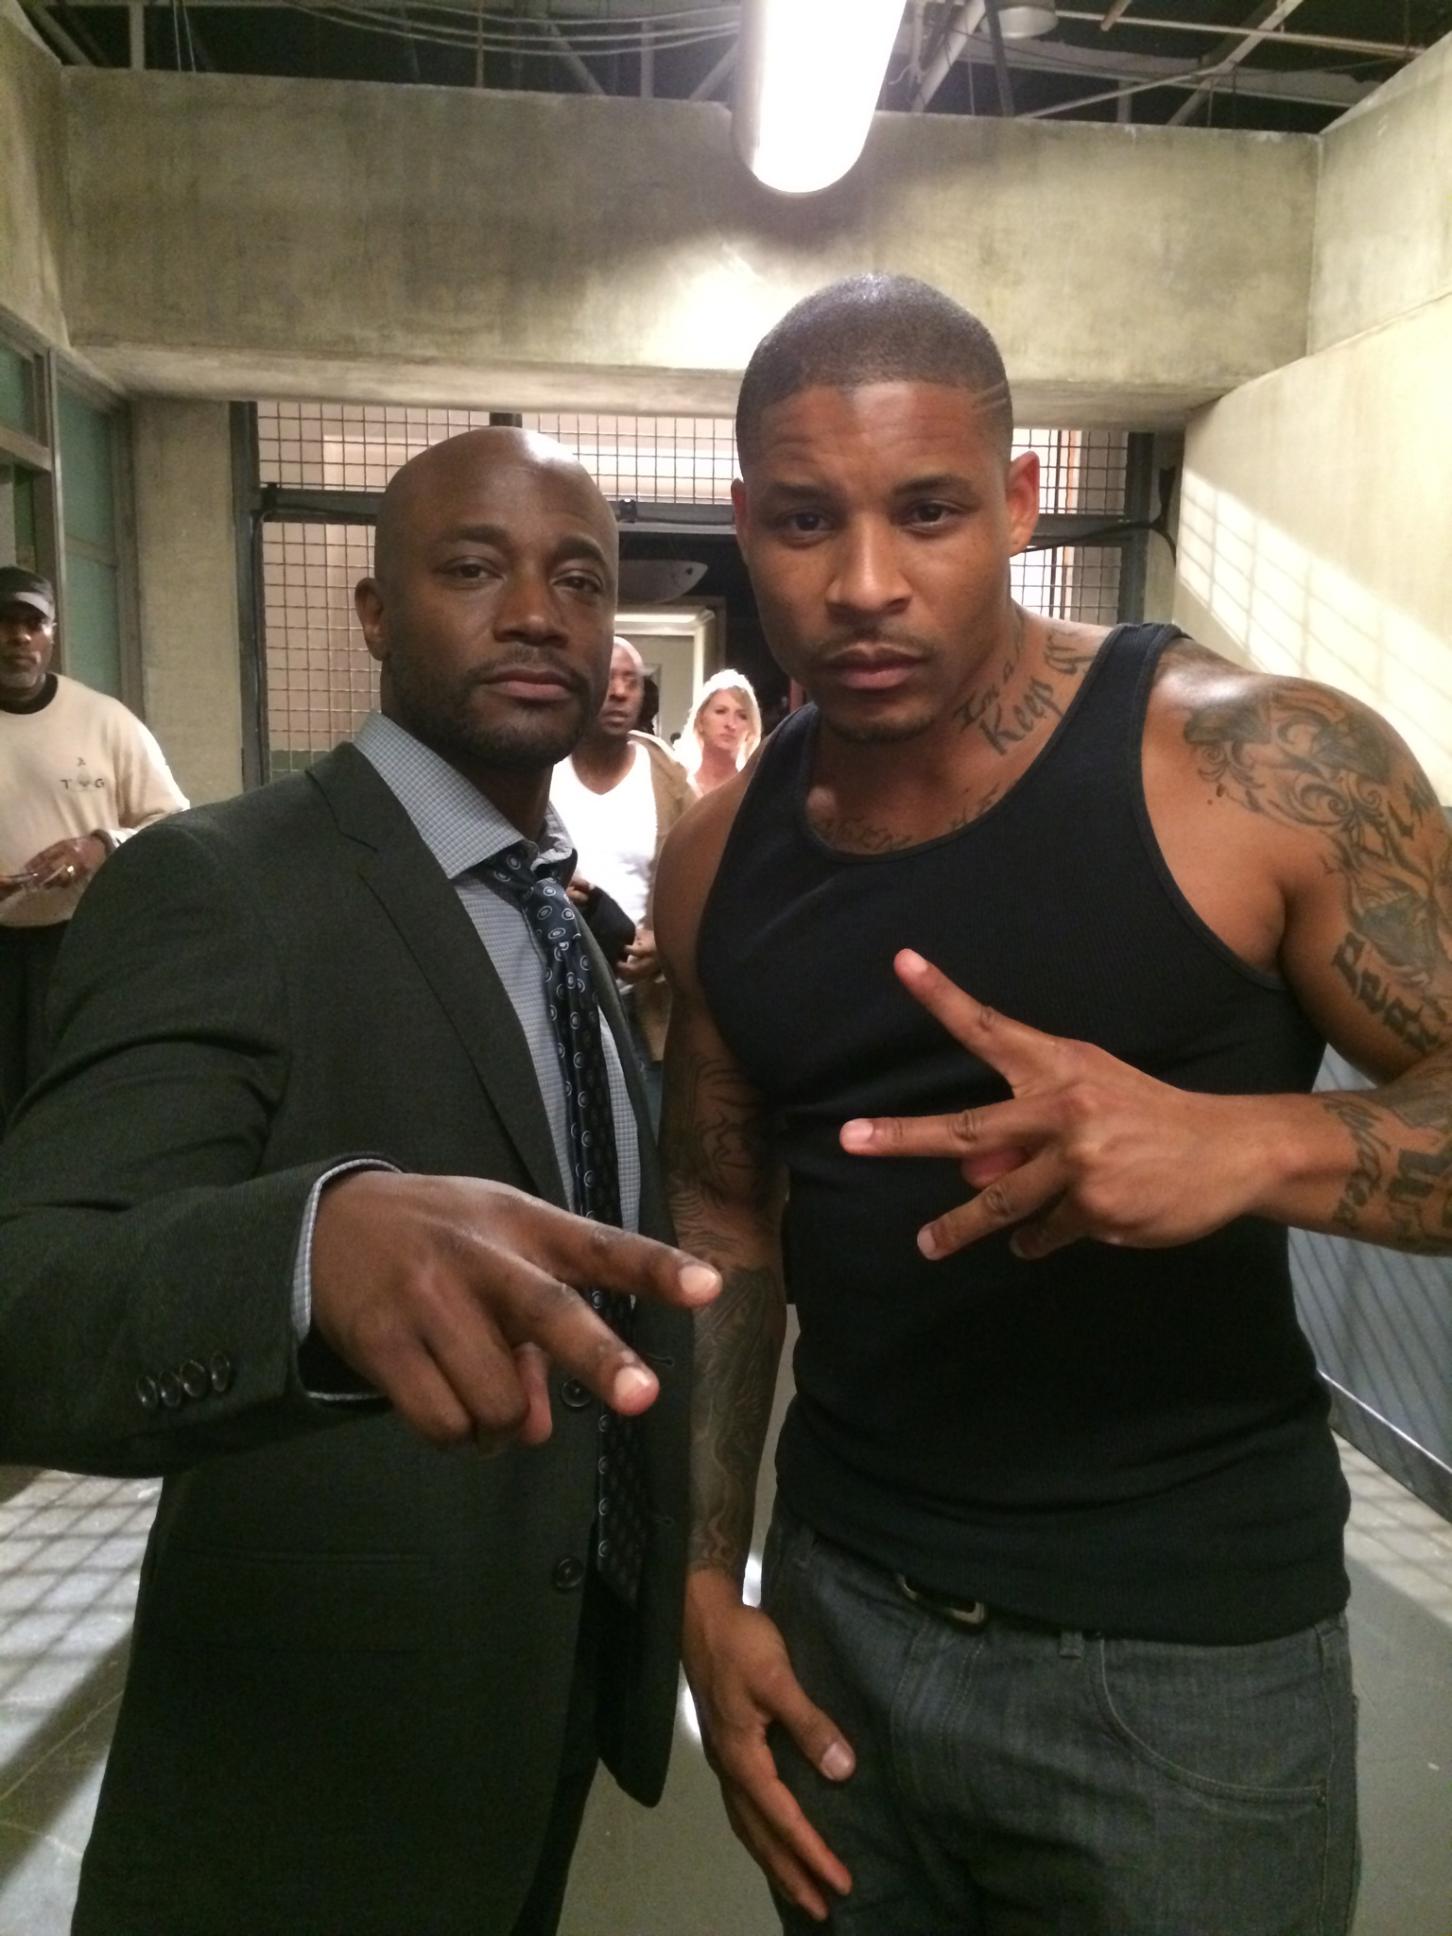 Me & Taye Diggs on the set of Murder in the First.